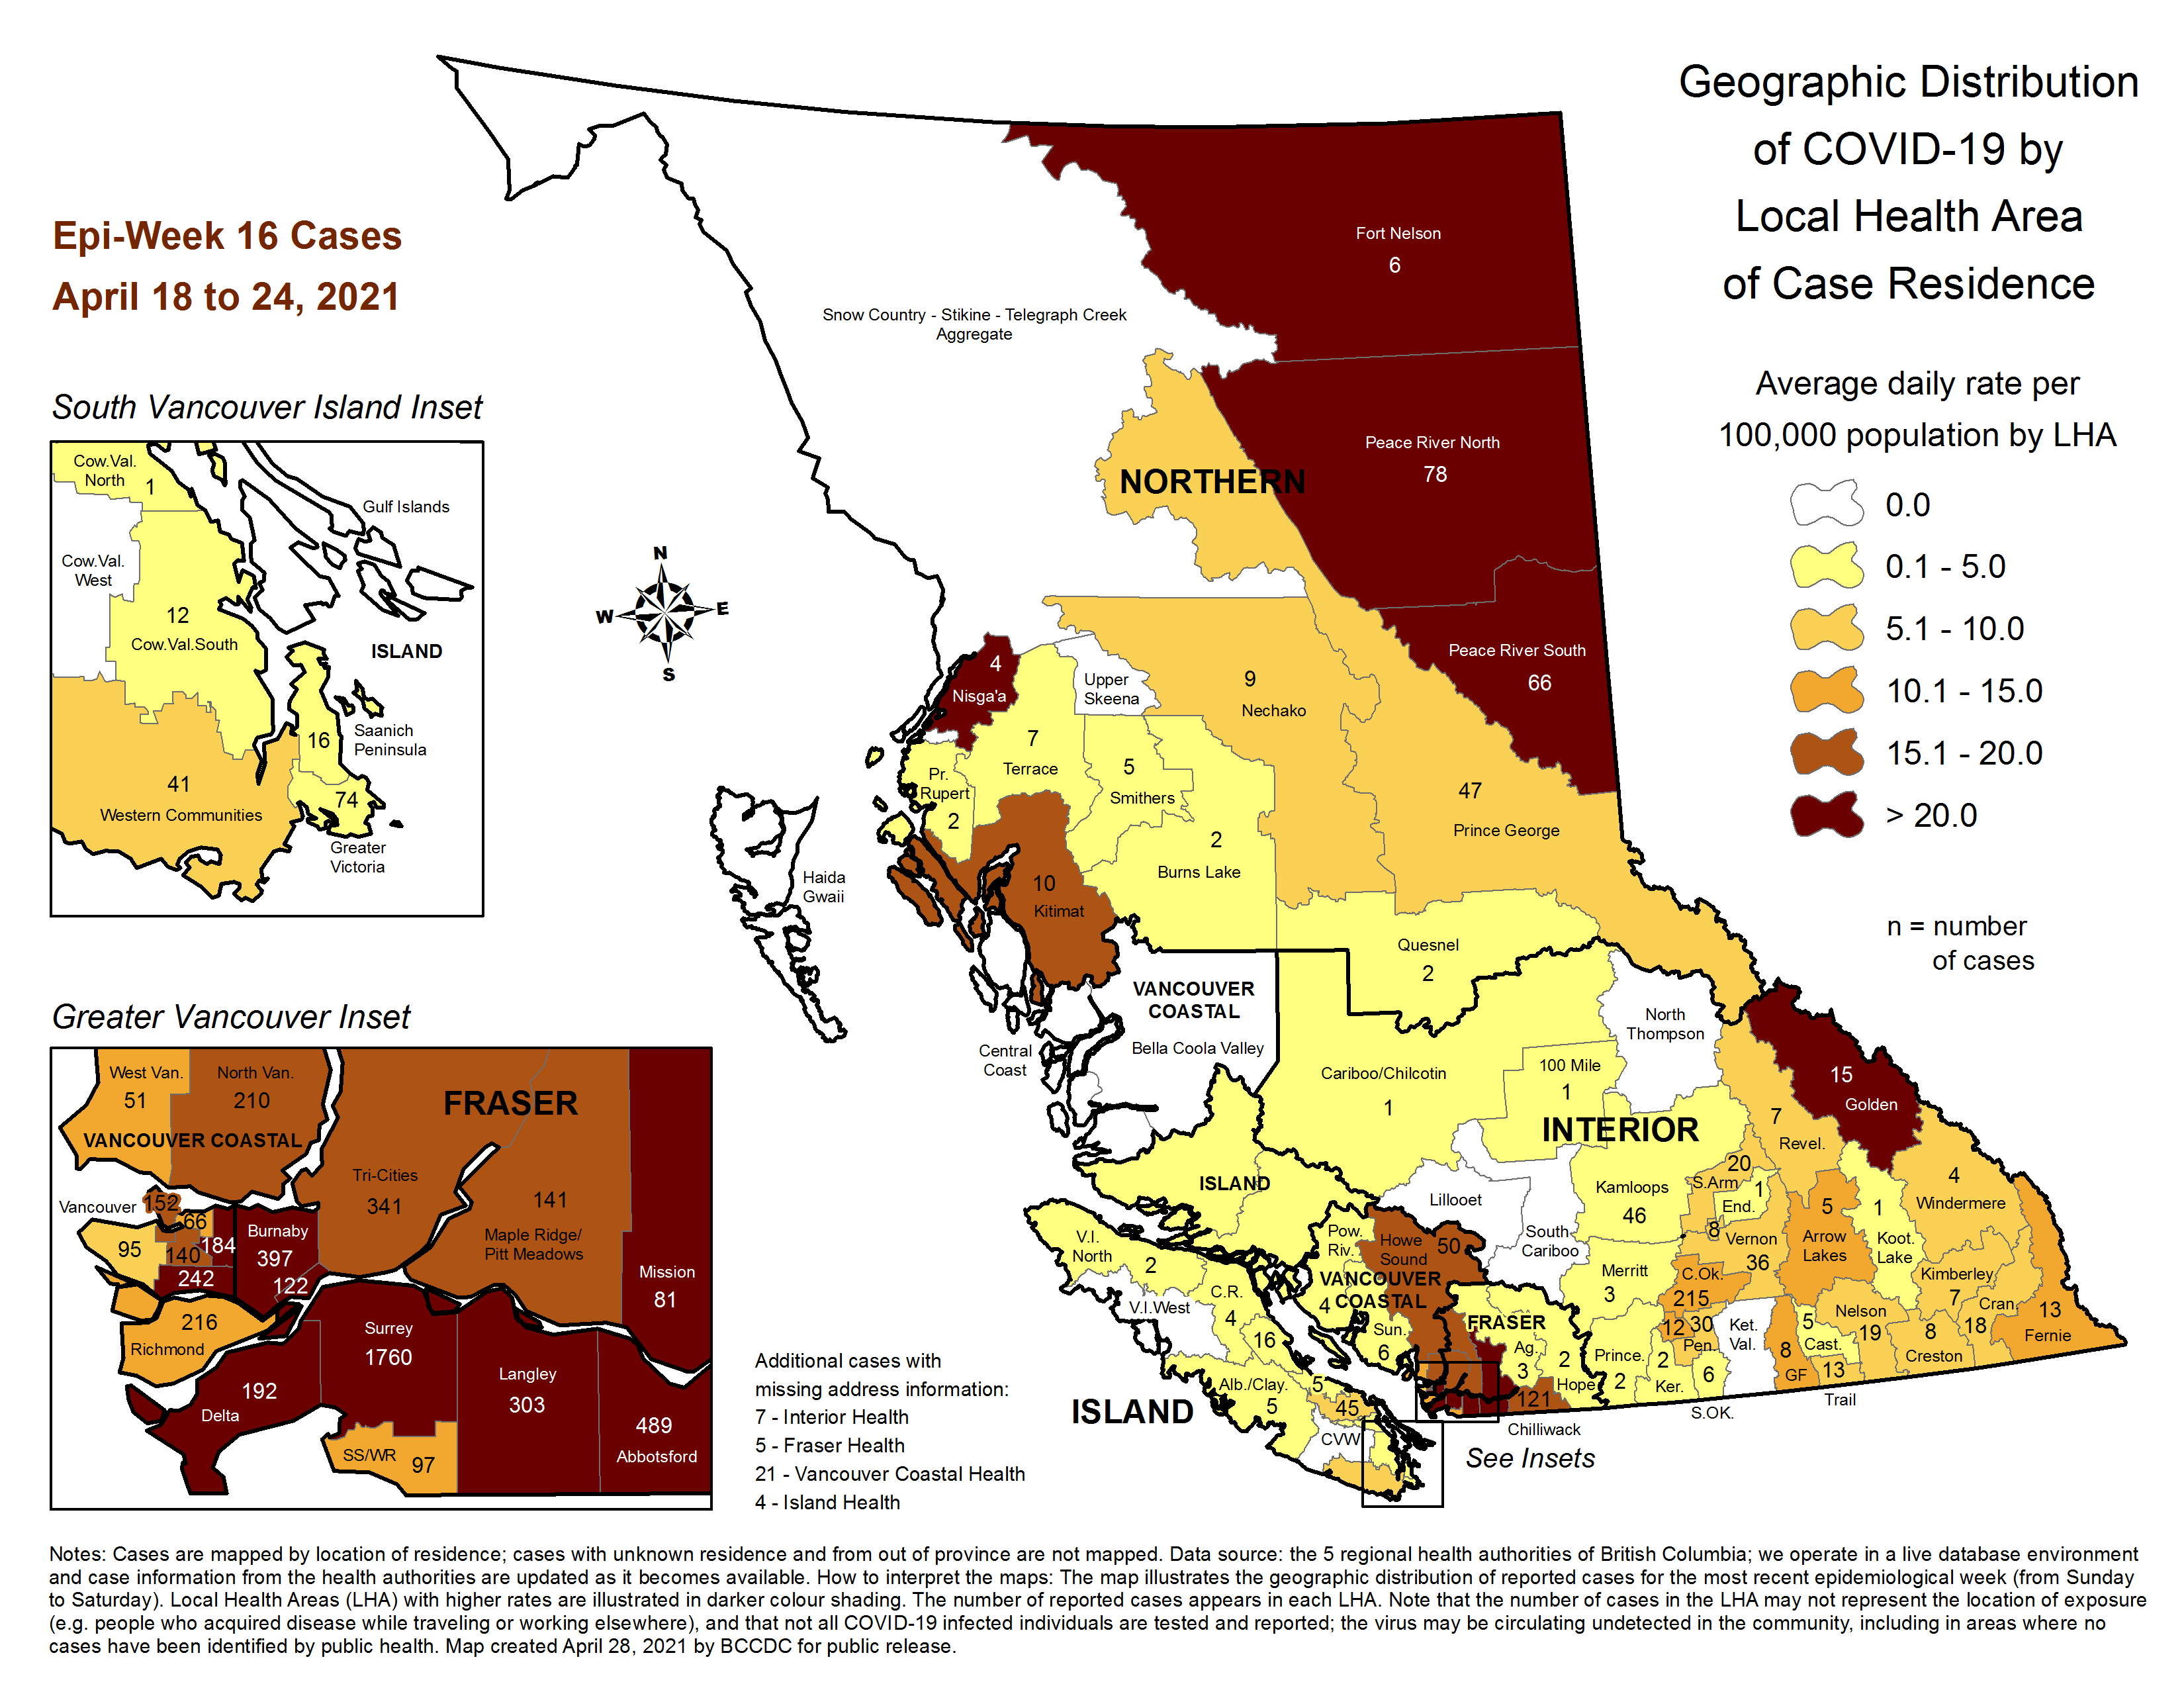 BC CDC data that shows 15 new cases of COVID-19 in the Golden area. (BC CDC photo)